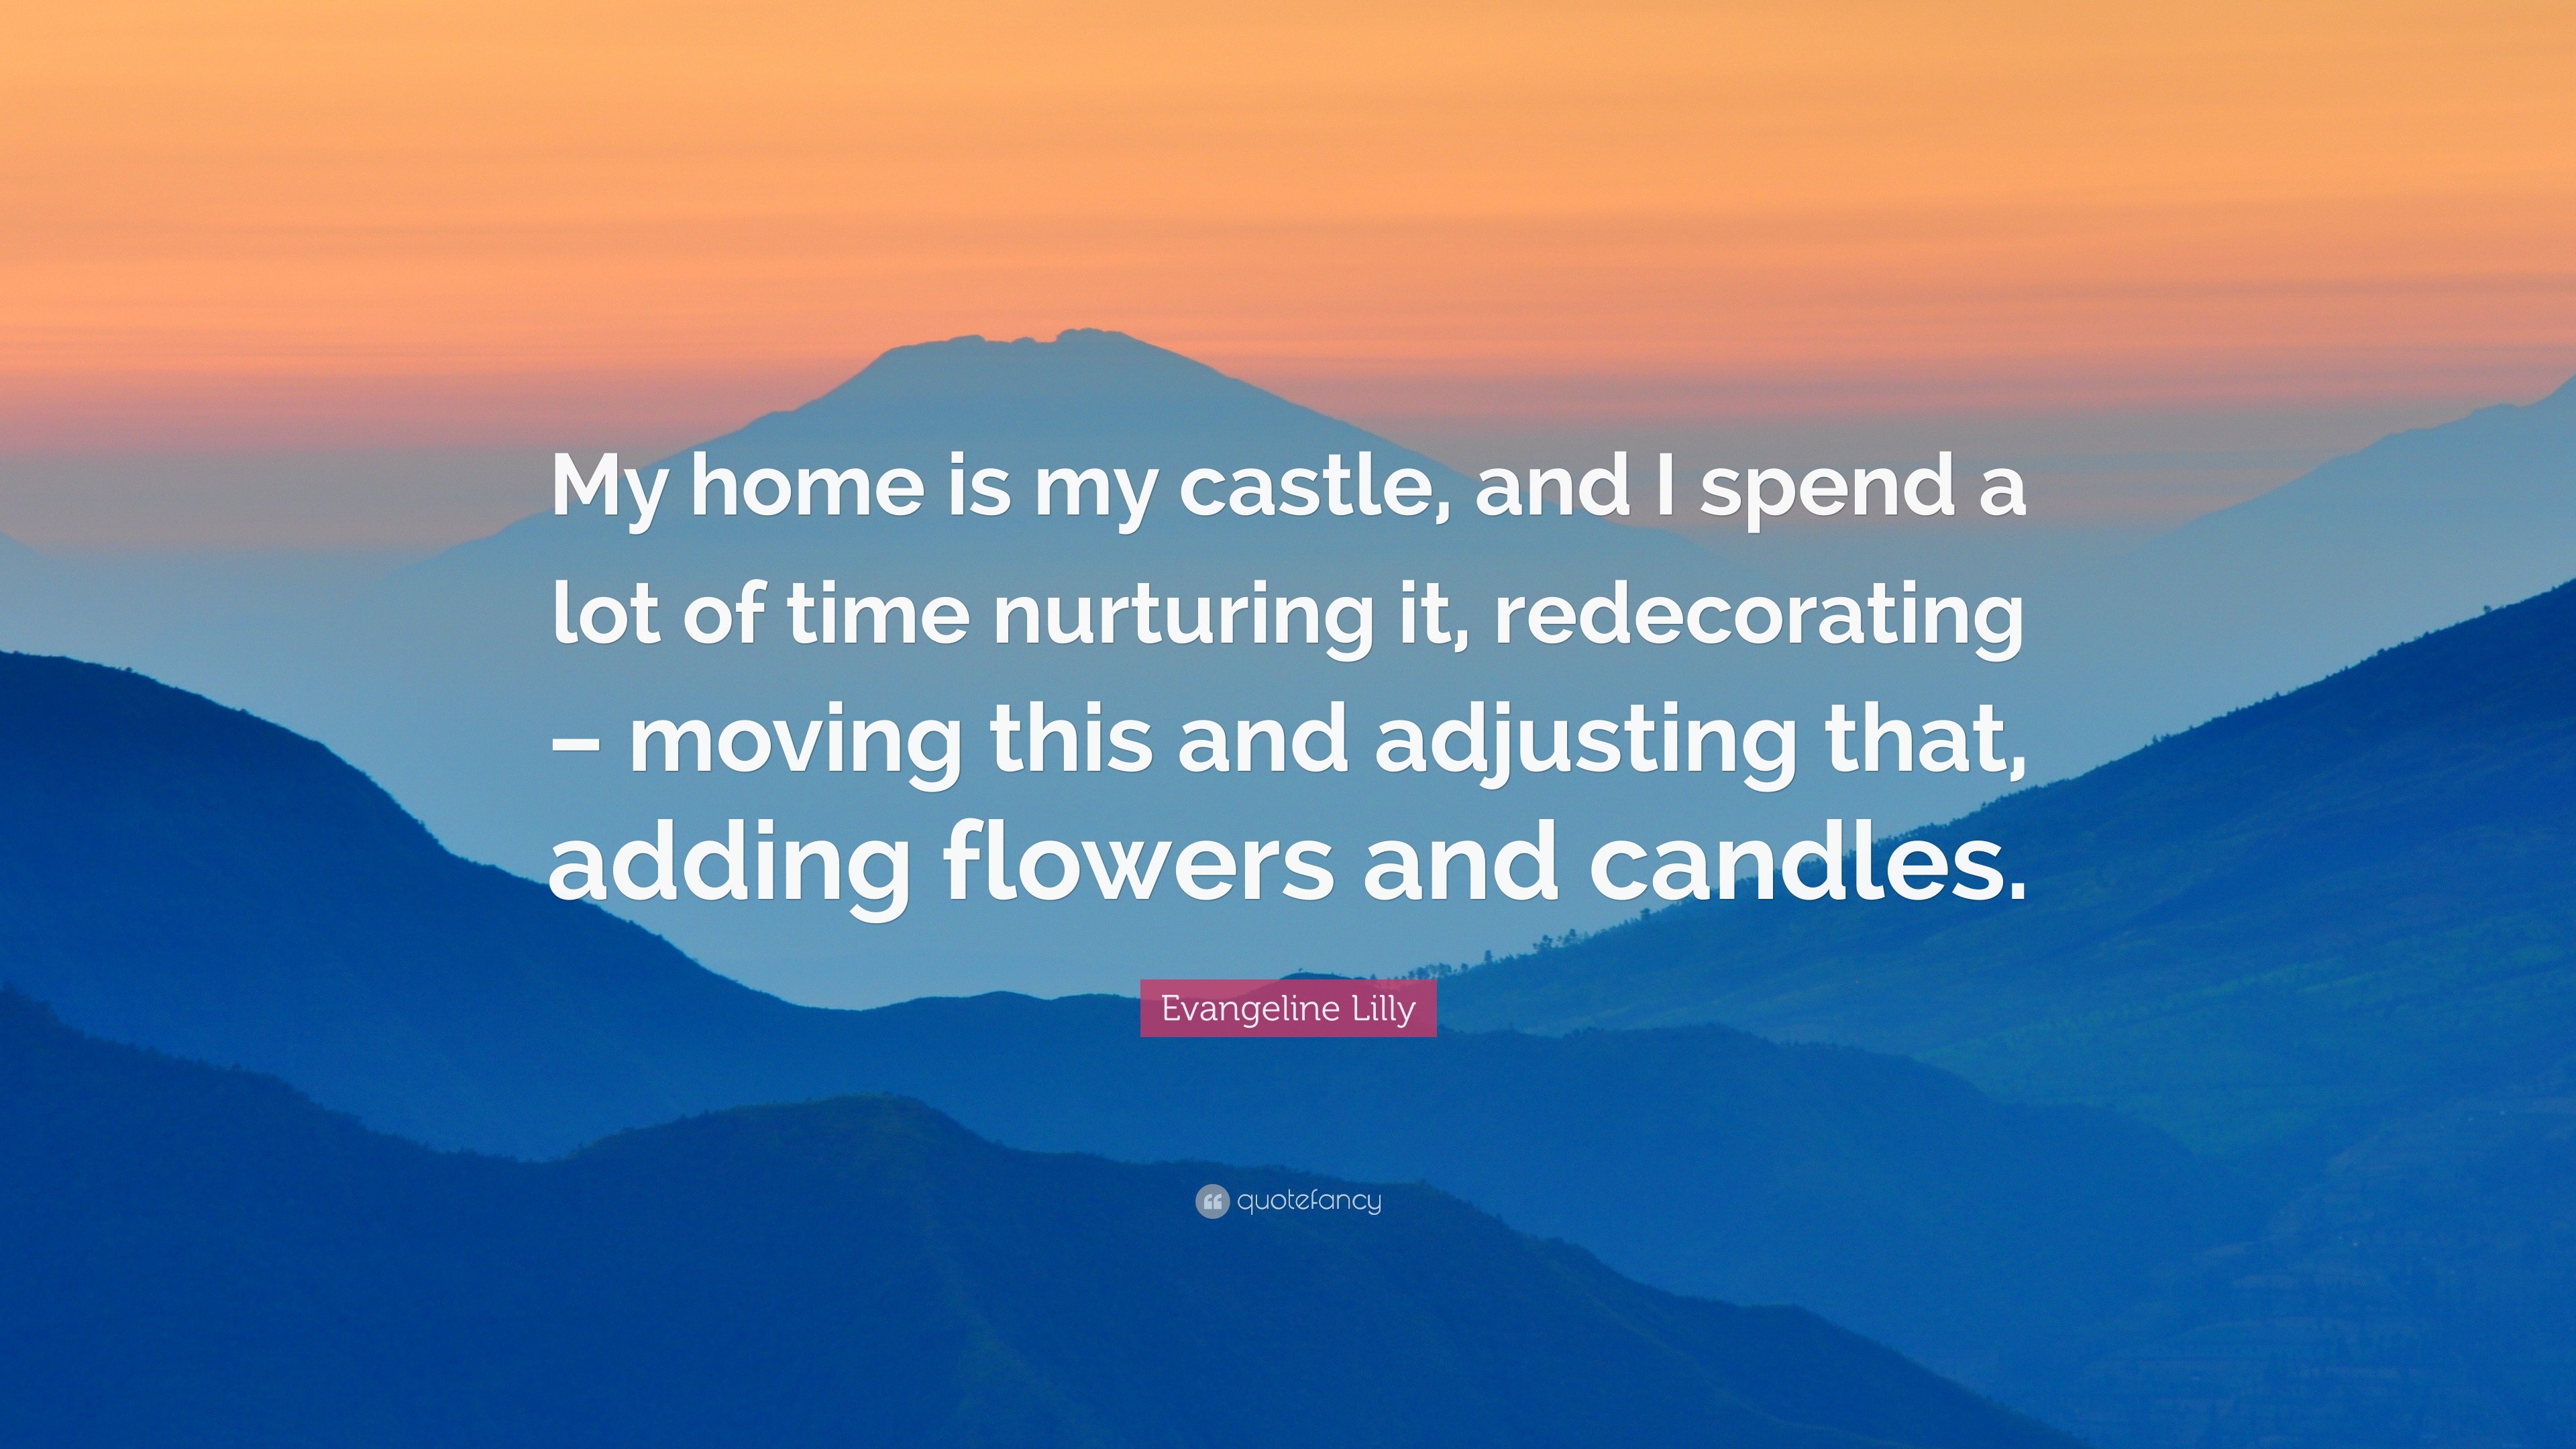 essay my home is my castle